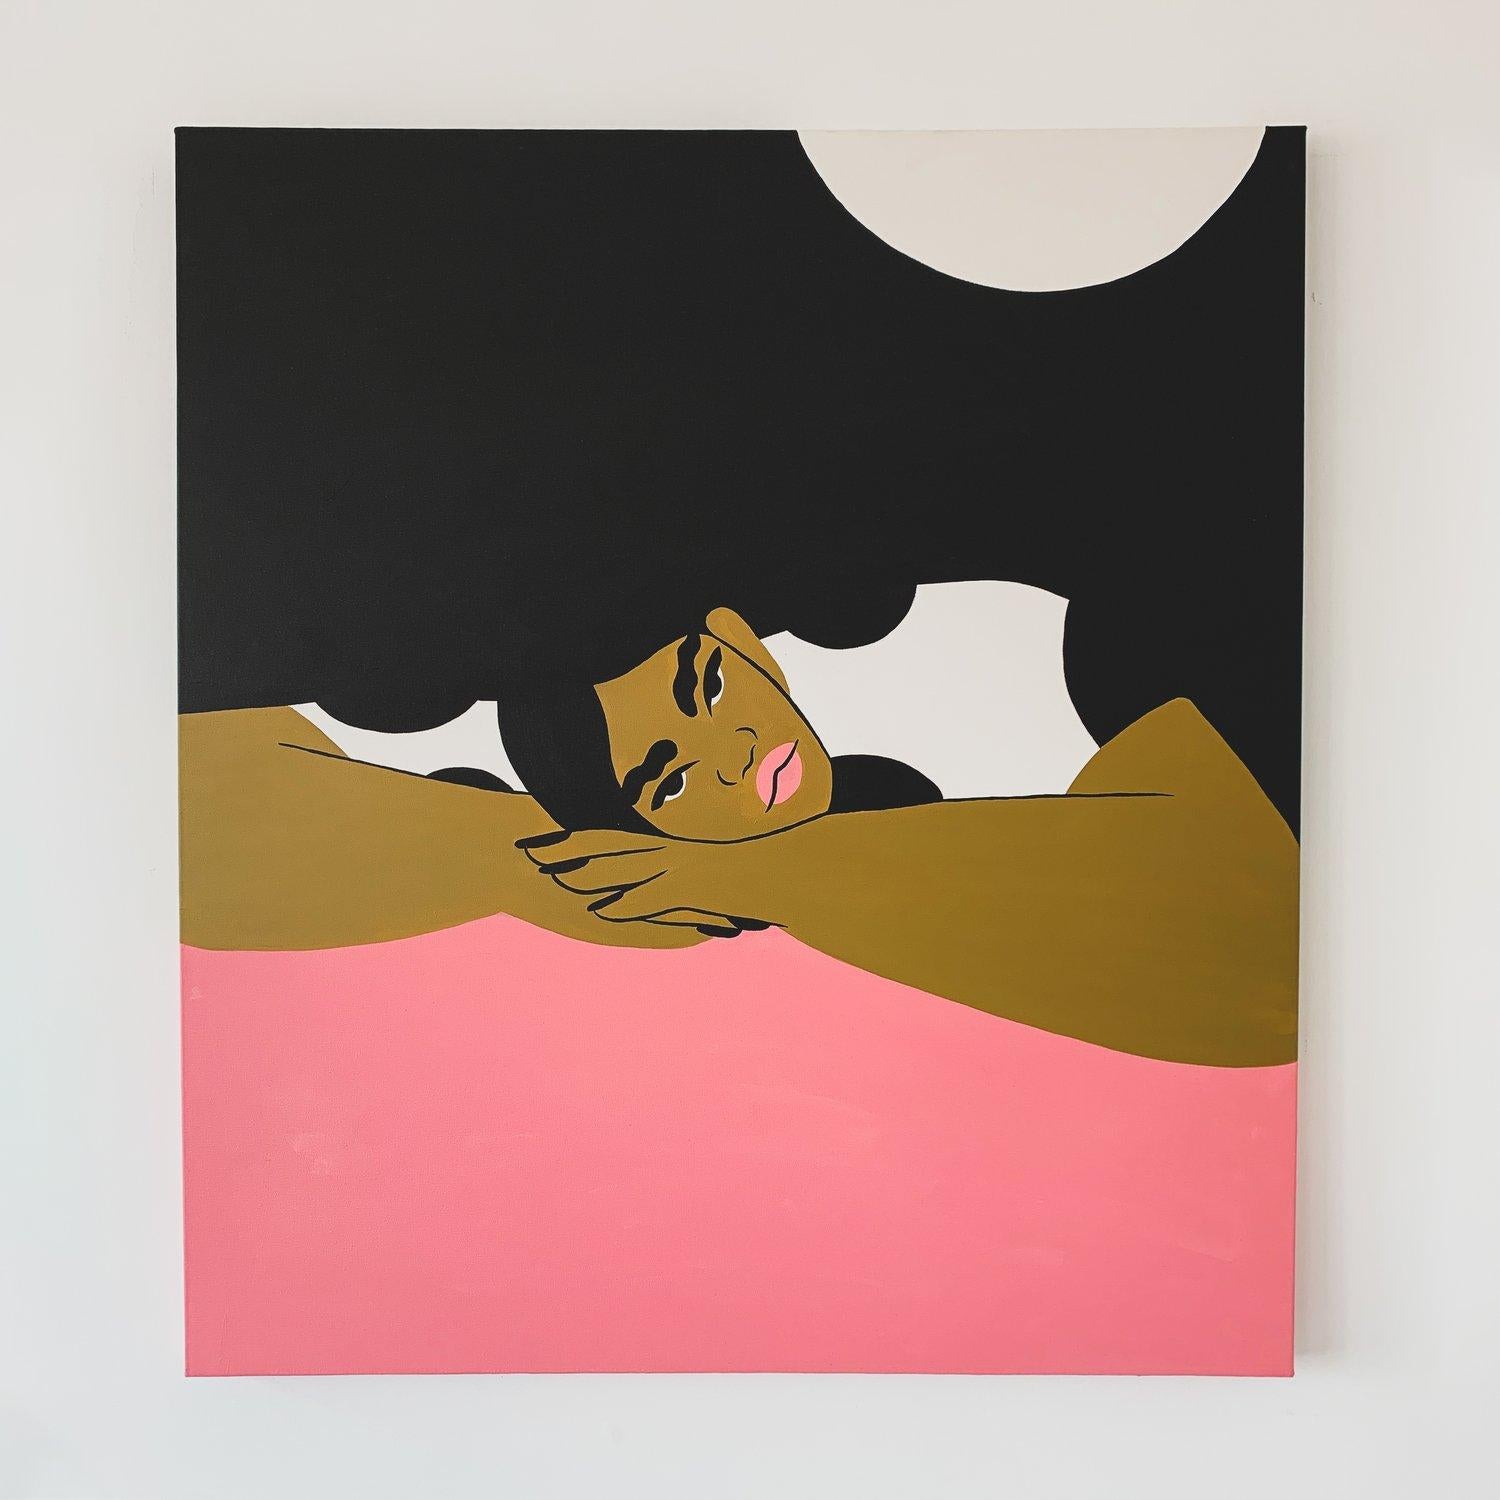 Tired and Brazilian - Painting by Camila Rosa